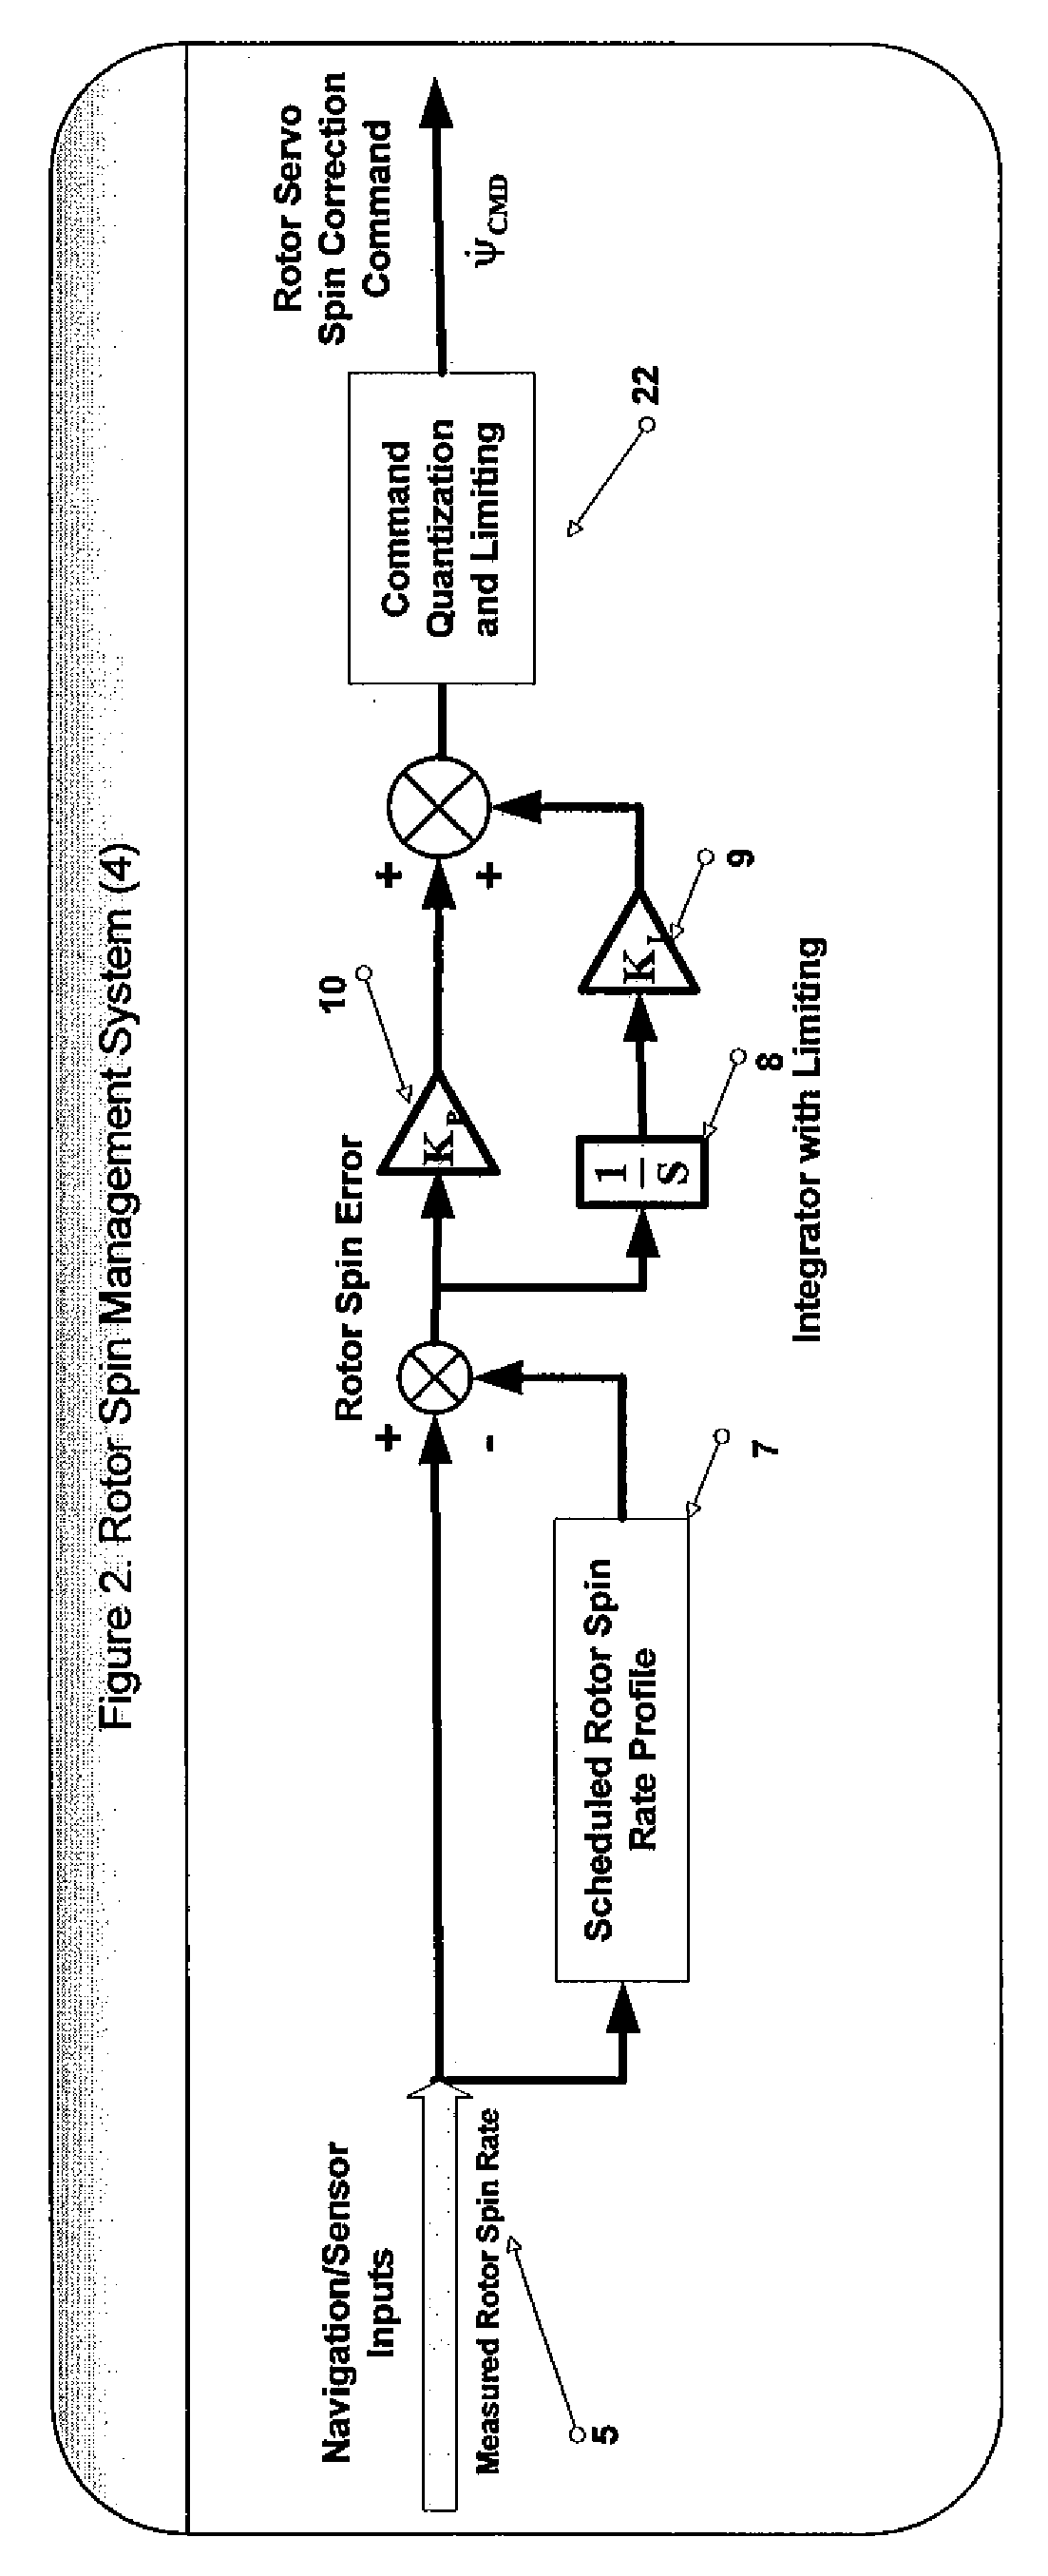 Control system for a vessel with a gyrostabilization system